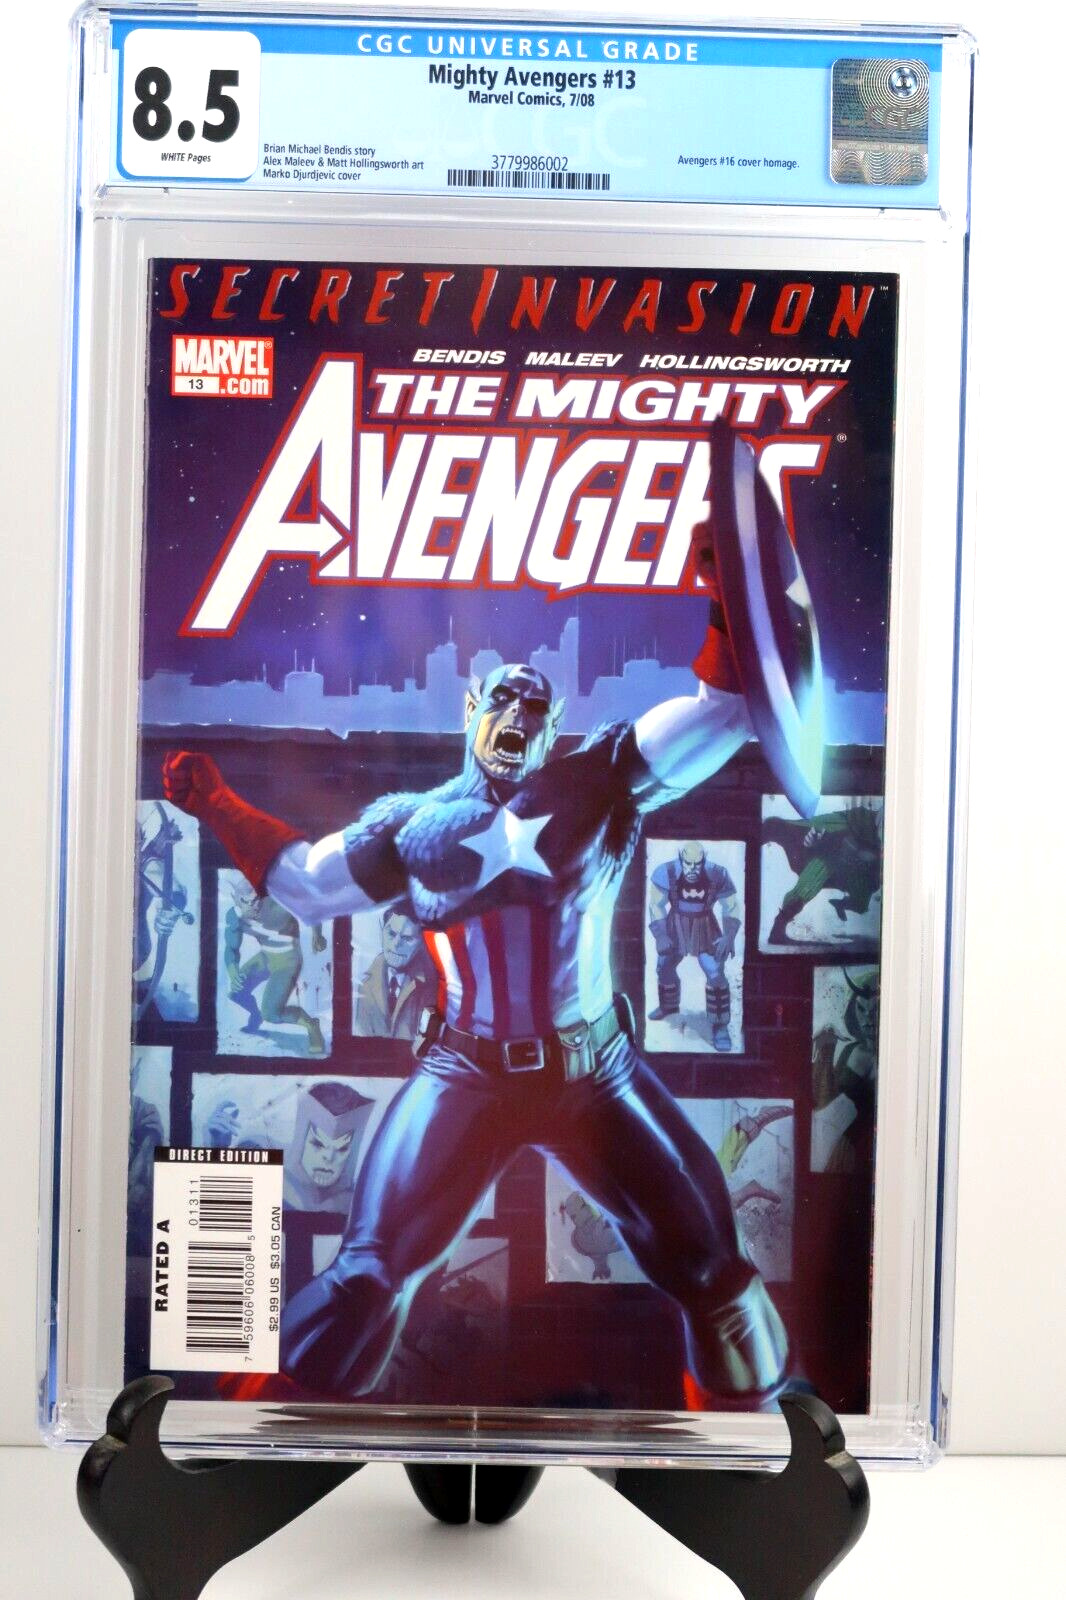 Mighty Avengers #13 CGC 8.5 Homage Cover to Avengers #16 Marvel Comics 2008